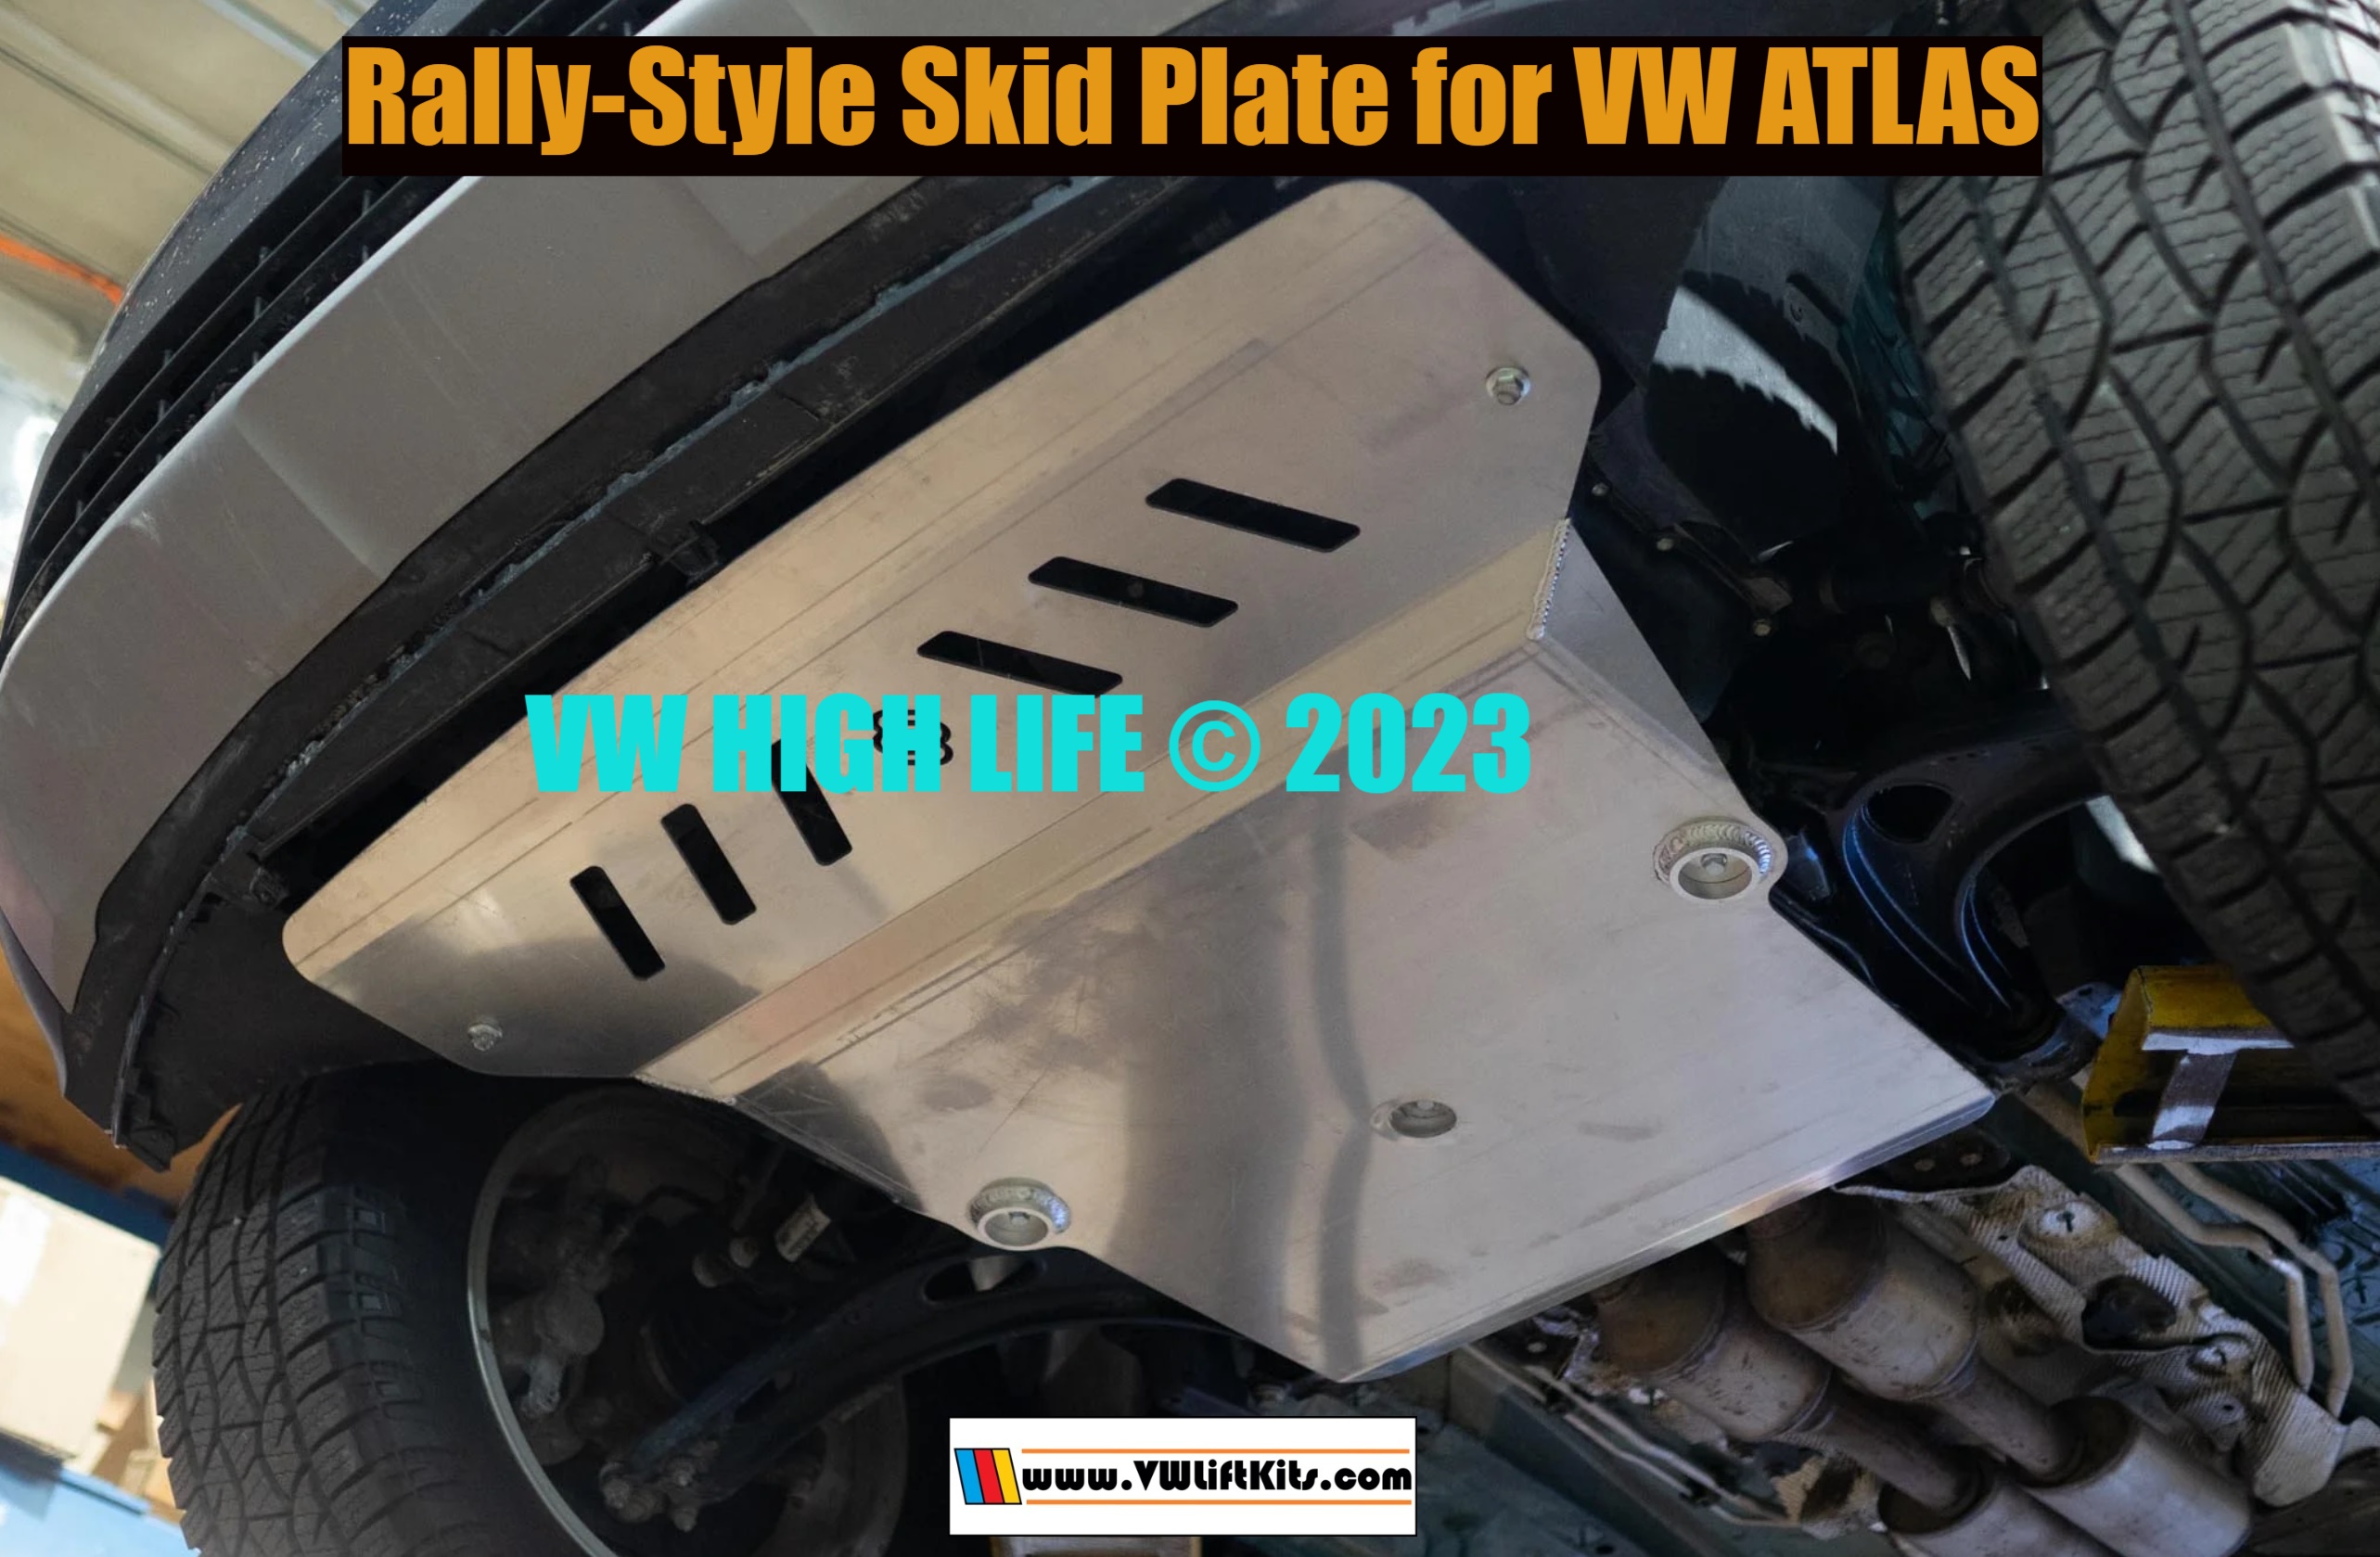 Custom Rally-Style Skid Plate for VW ATLAS to protect your drivetrain and investment.